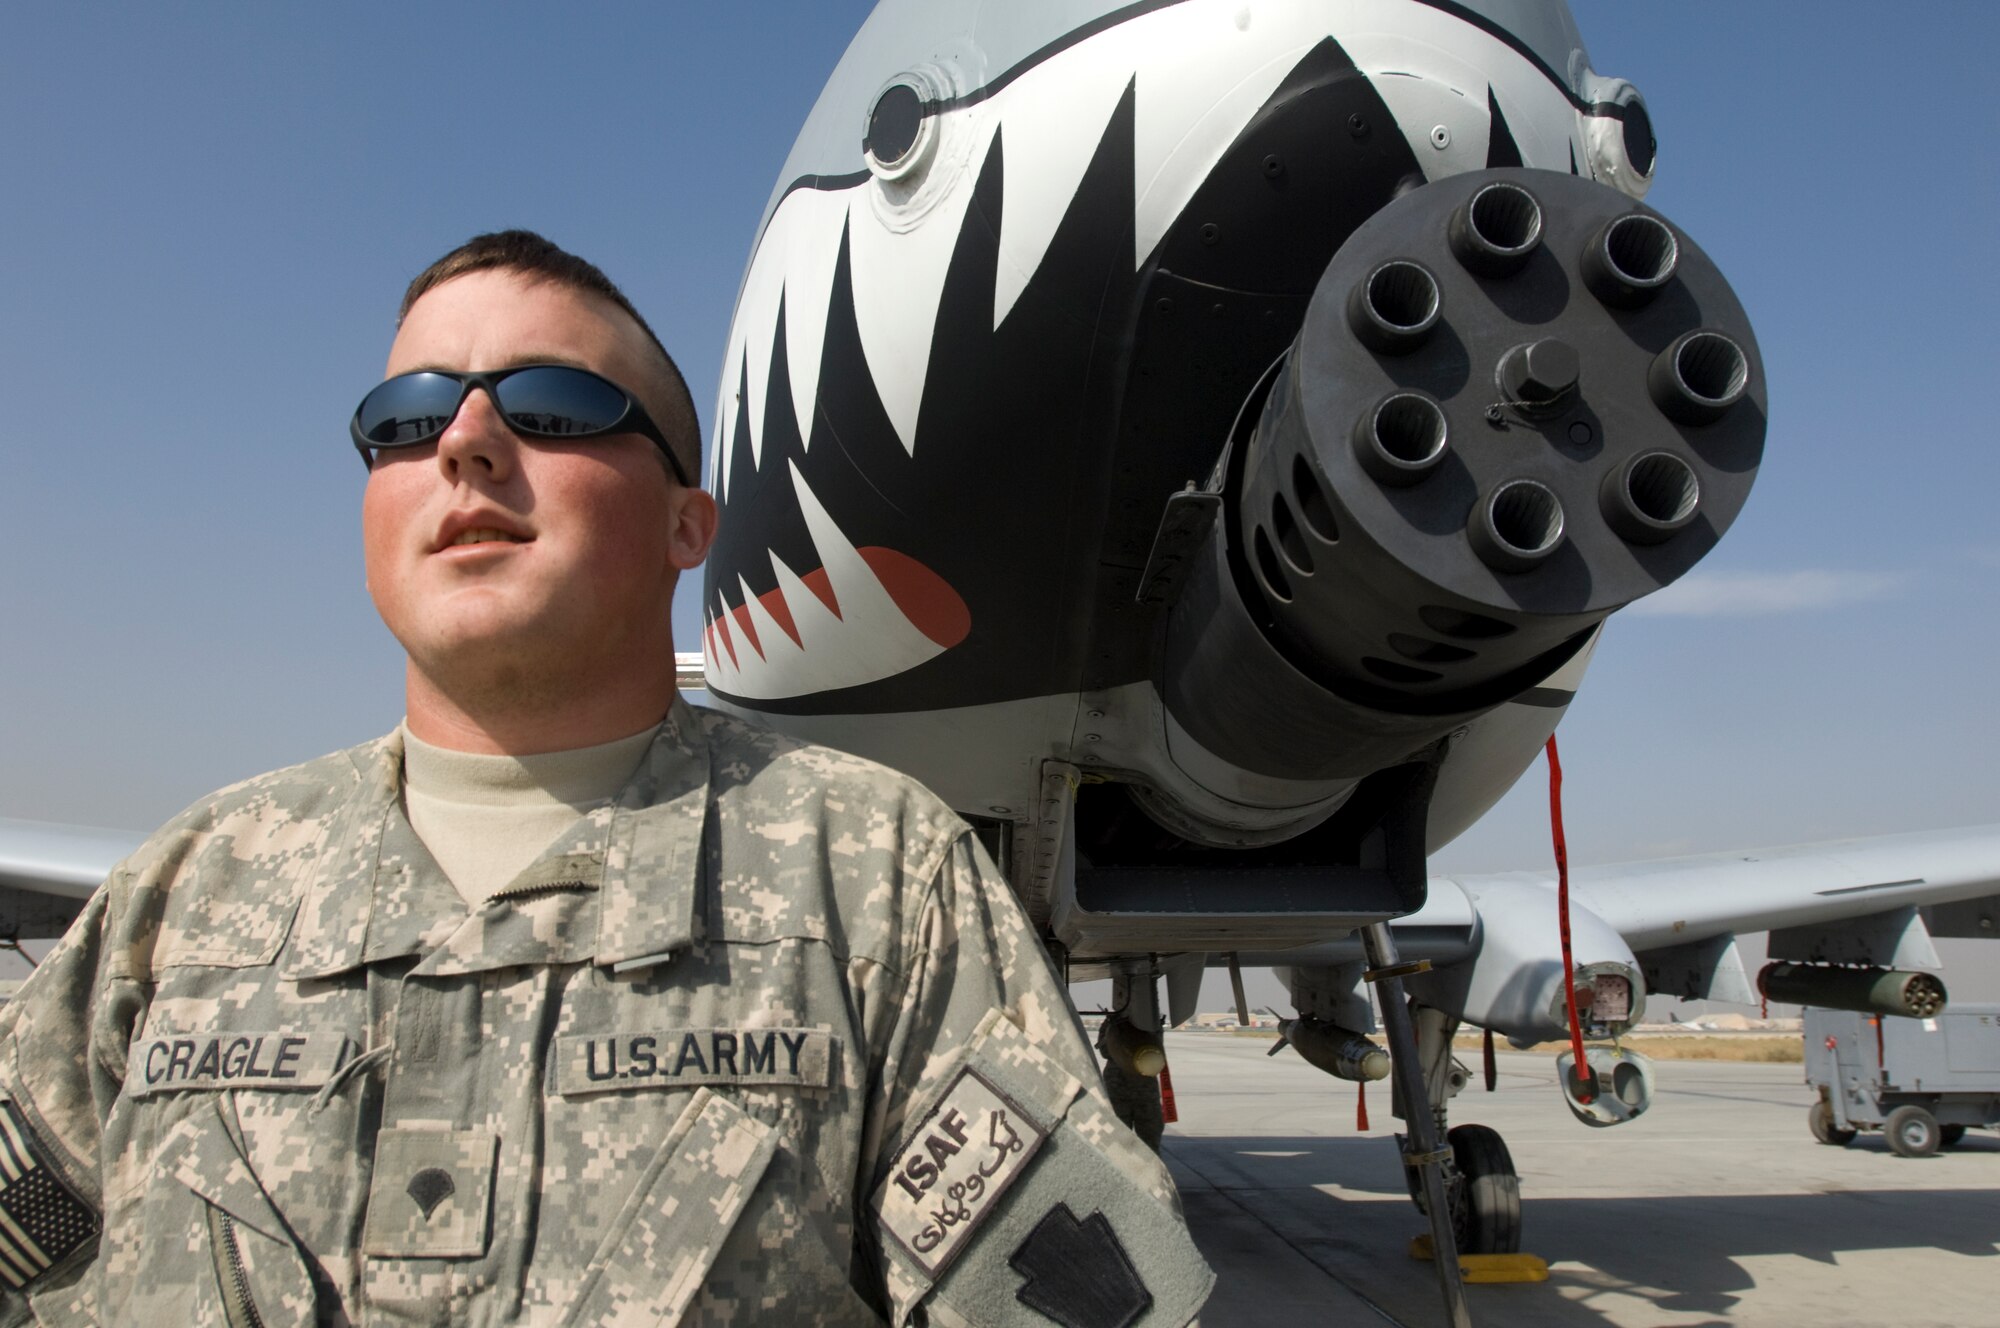 BAGRAM AIR FIELD, Afghanistan -- Pennsylvania National Guard Spc. Jeffery Cragle stands next to the 30mm cannon on a A-10 Thunderbolt II during visit by the National Guard Soldiers to the 391st and 75th Expeditionary Fighter Squadron's. Members from the squadrons hosted the Soldiers after they expressed a desire to thank pilots who provide close-air support for ground troops engaged in firefights with the enemy forces. (U.S. Air Force photo by Master Sgt. Keith Brown)